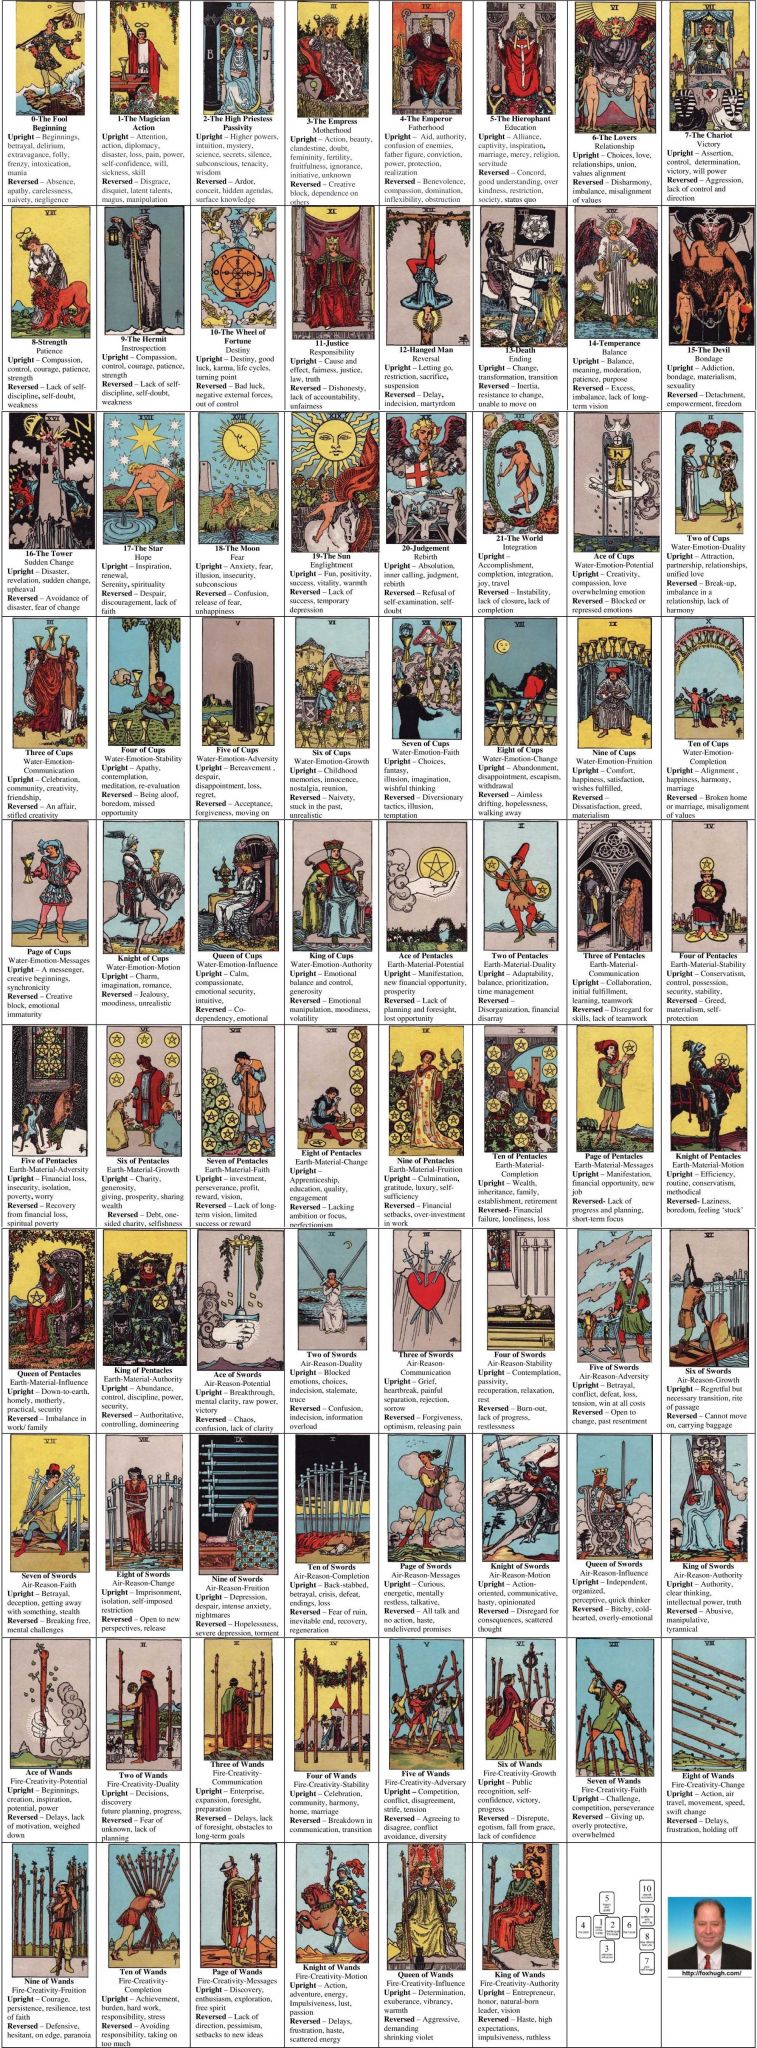 Spanish Verb Conjugation Practice Worksheets as Well as fortune Telling with Playing Cards